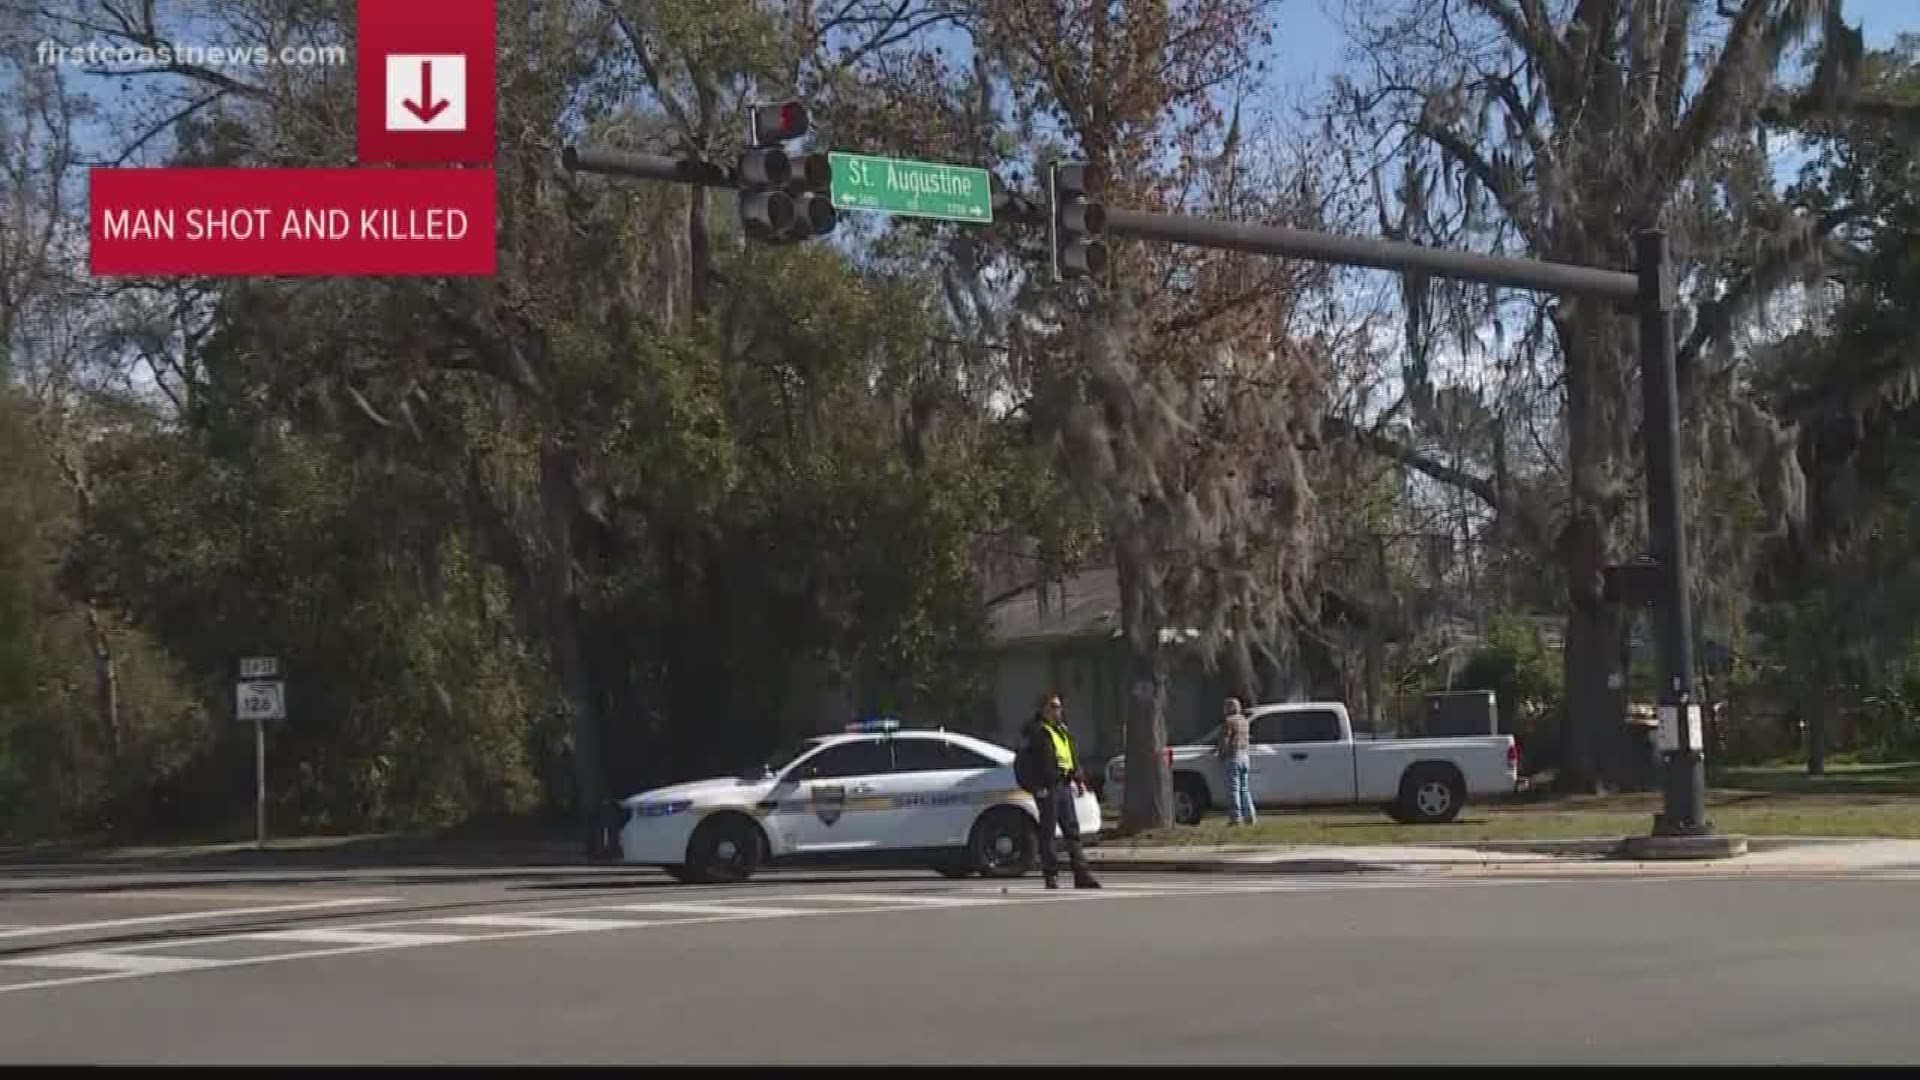 A man was gunned down on Emerson Street, just off of St. Augustine Road Thursday afternoon.